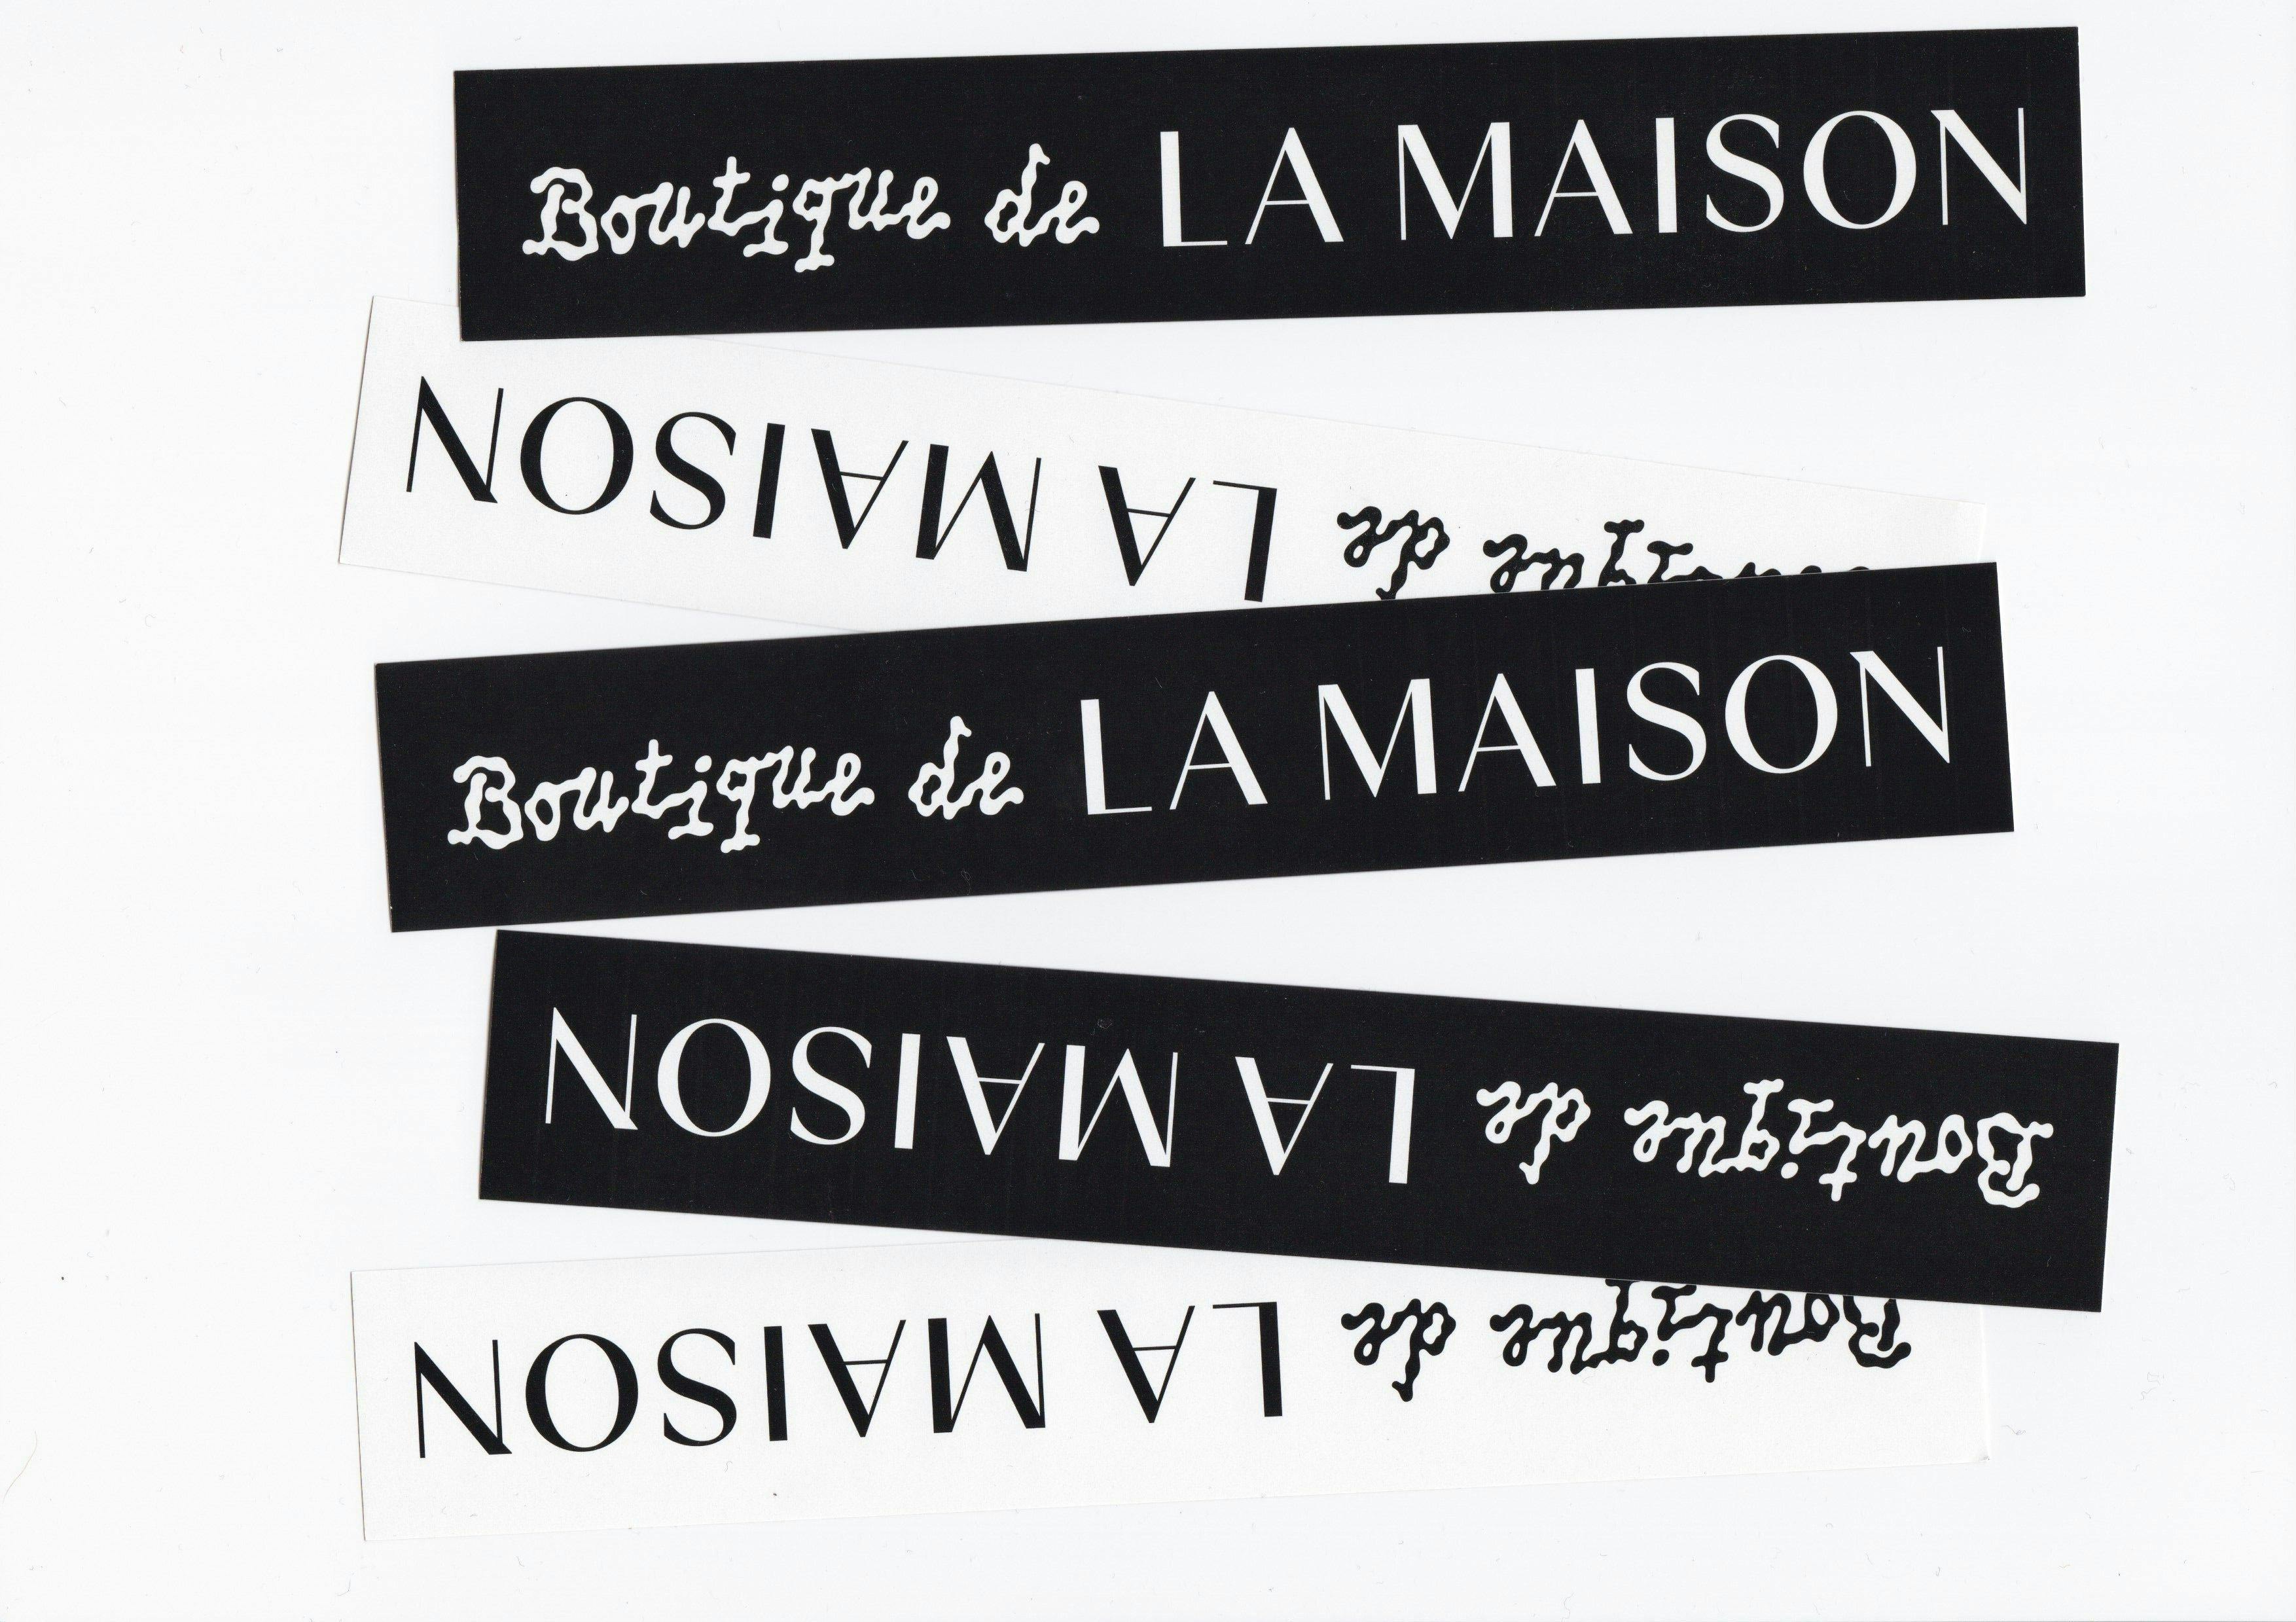 <p>The stickers we designed with the Boutique de La Maison logo are printed on uncoated paper that is PEFC certified. In general, we have placed great emphasis on sustainability in the production of all print products. The aim of sustainable production is to ensure that products are manufactured in a way that conserves resources and preserves the environment's ability to regenerate.</p>